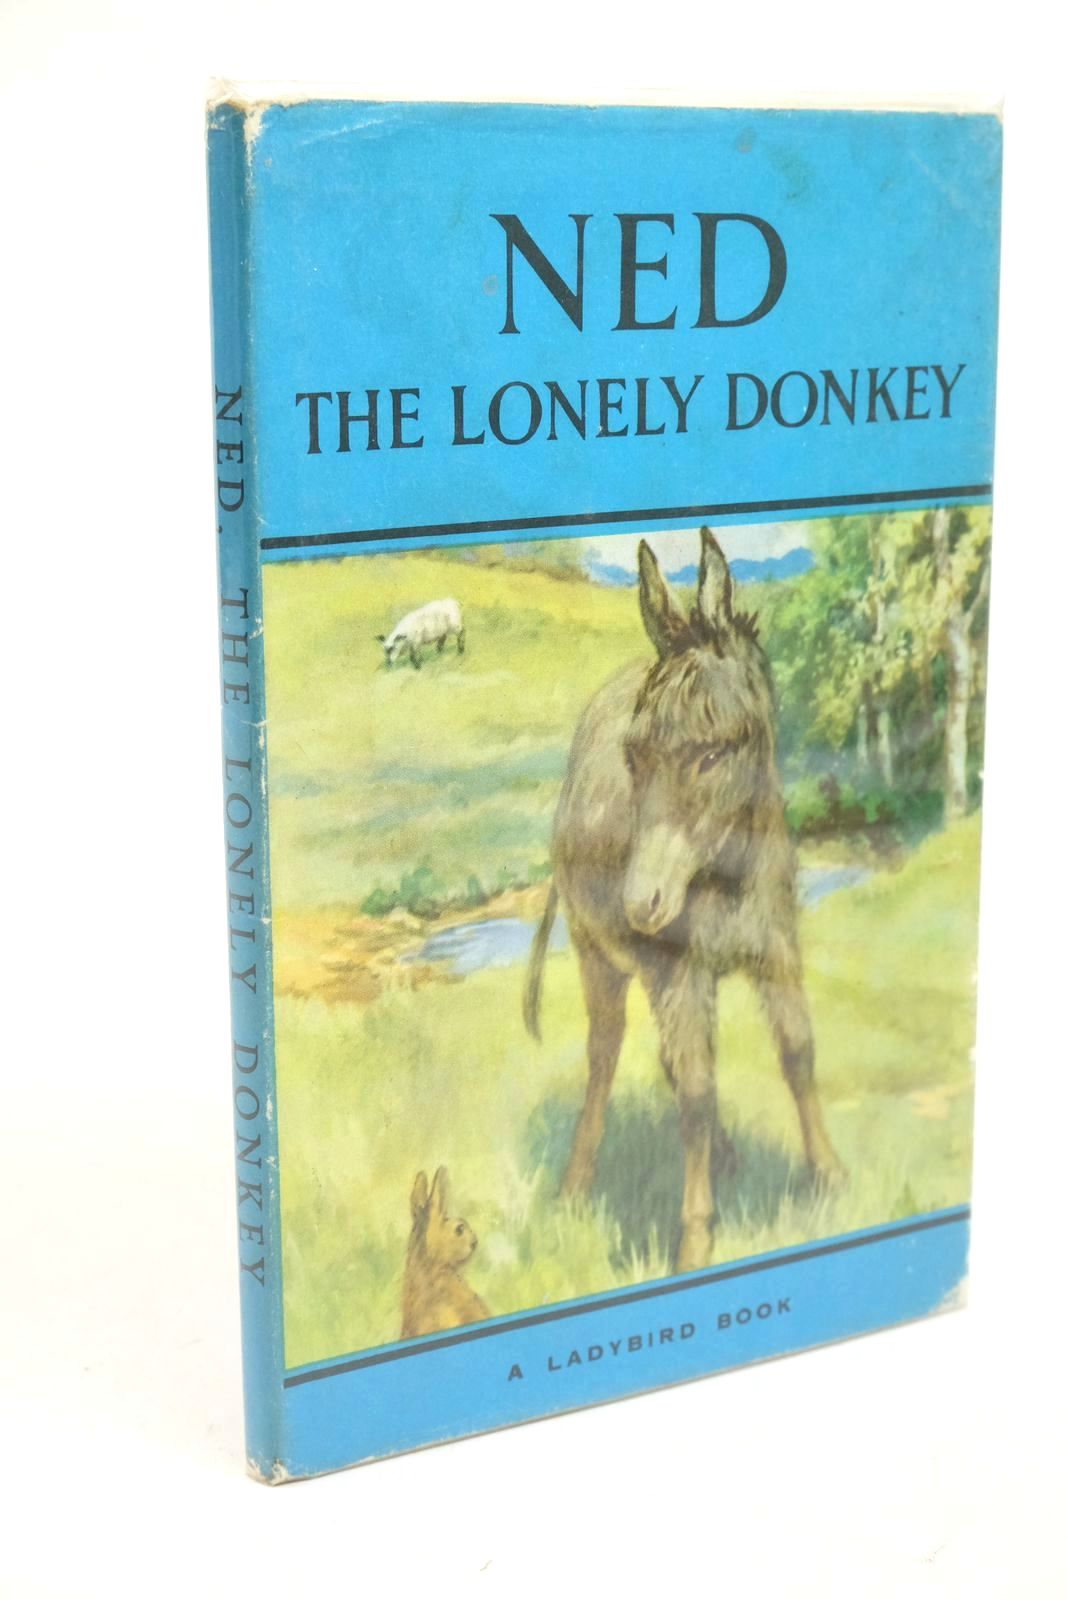 Photo of NED THE LONELY DONKEY written by Barr, Noel illustrated by Hickling, P.B. published by Wills & Hepworth Ltd. (STOCK CODE: 1322400)  for sale by Stella & Rose's Books